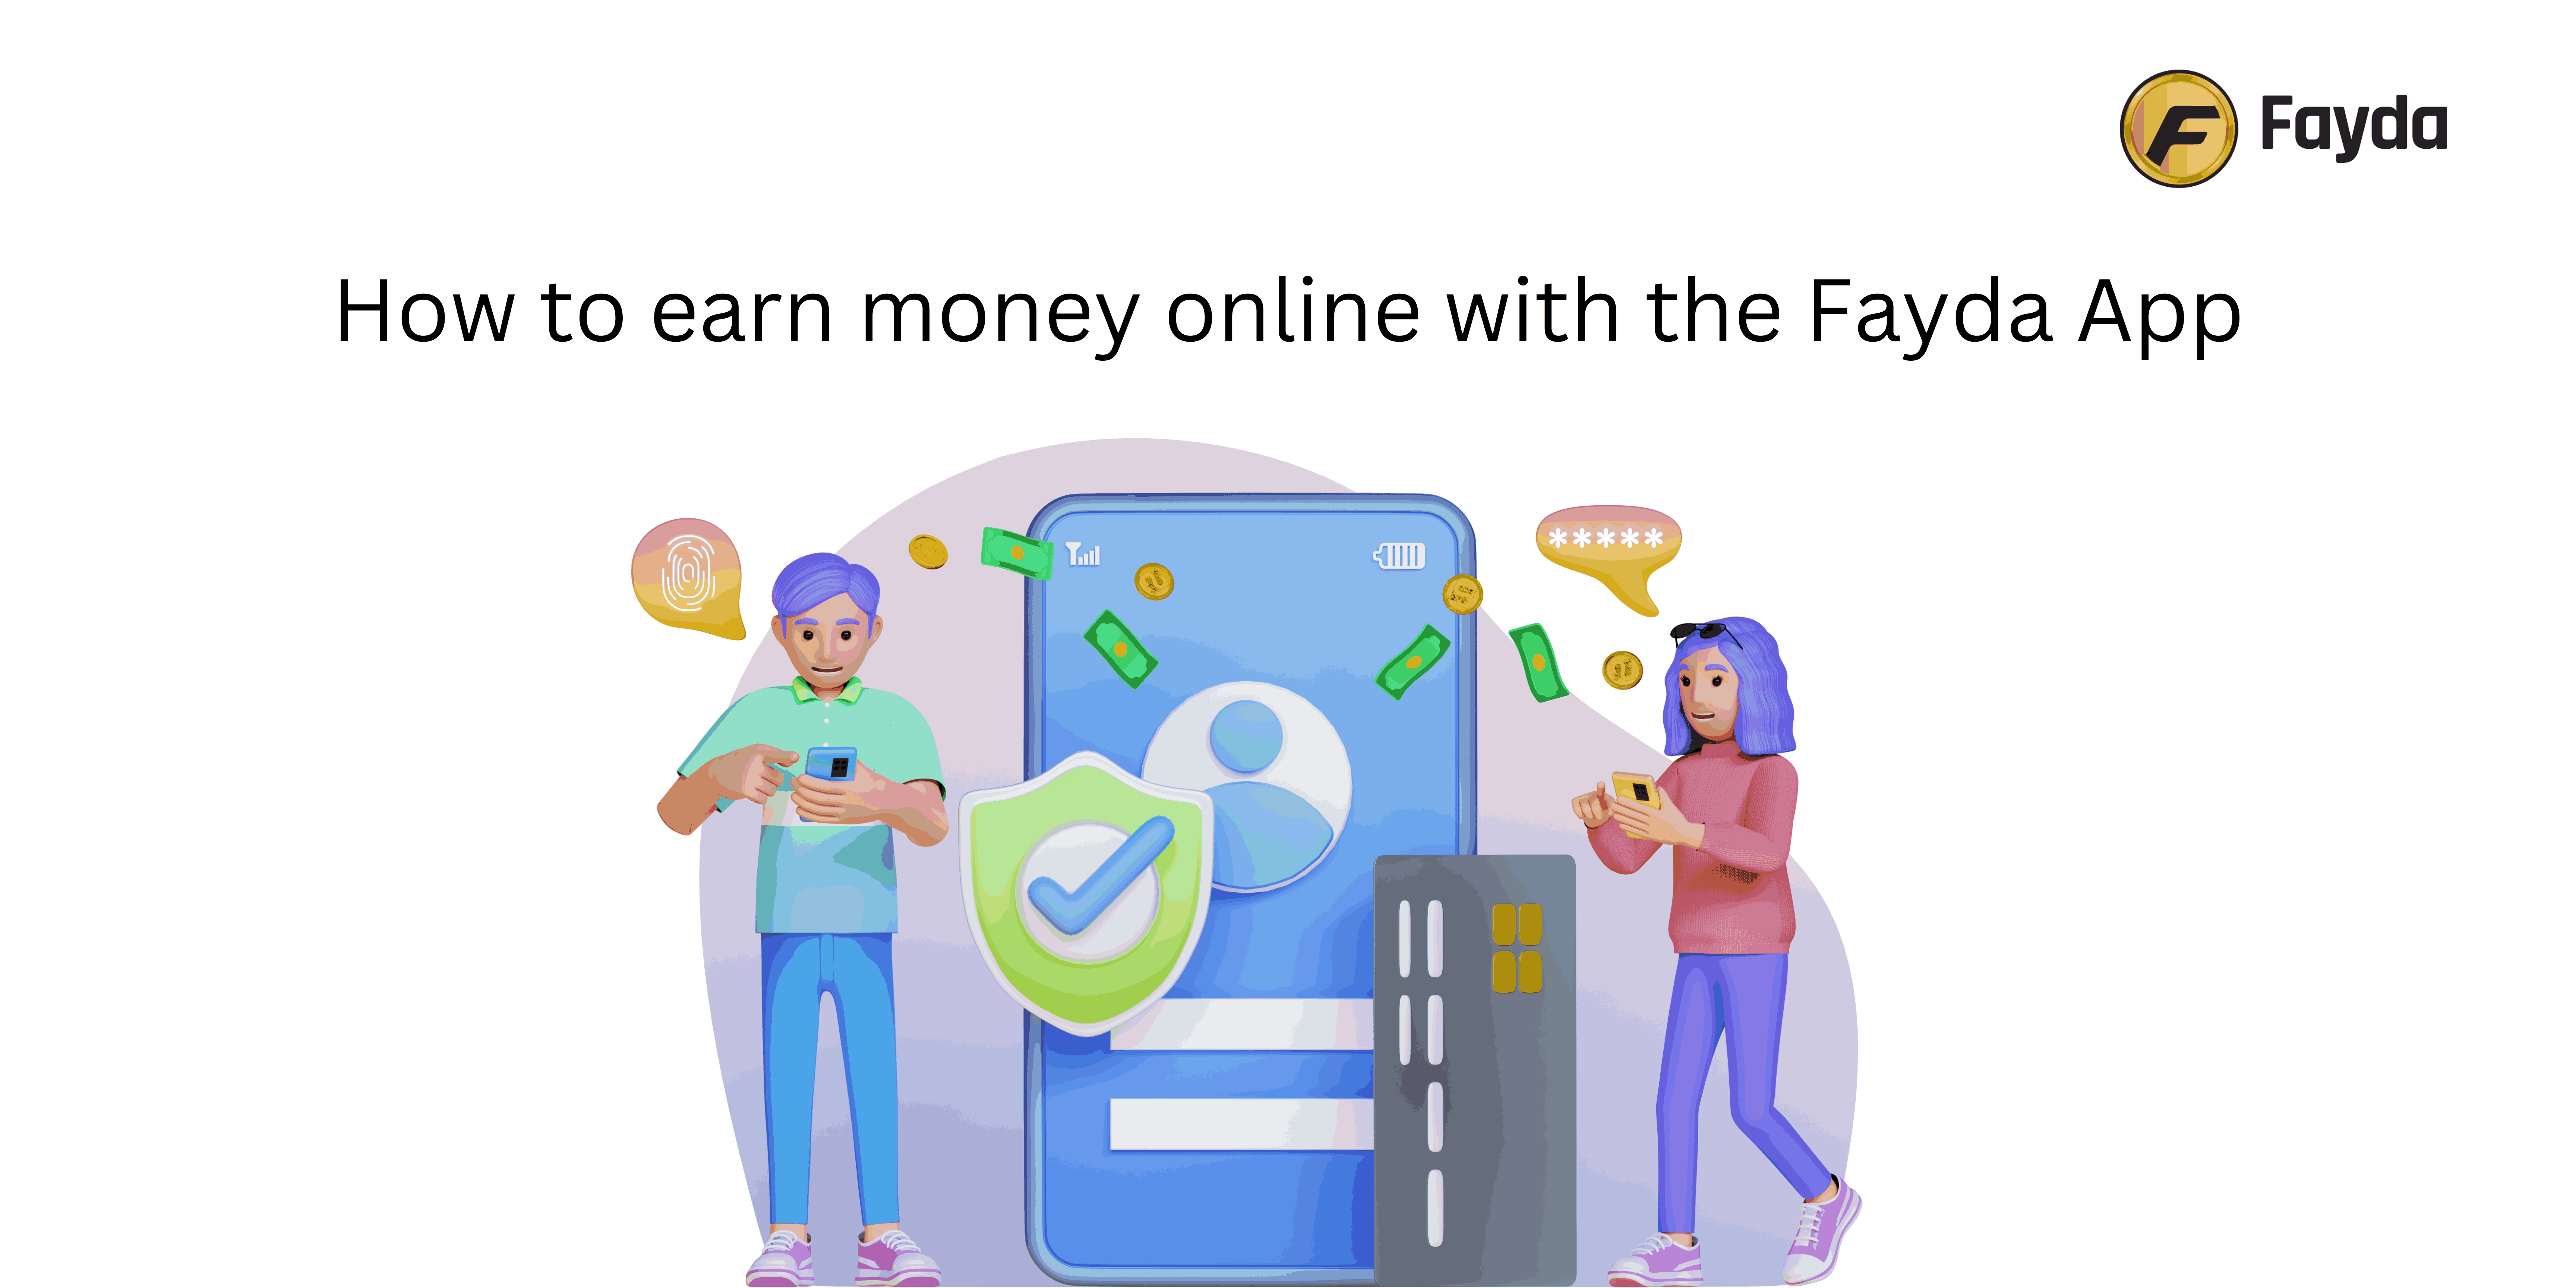 How to earn money online with the Fayda App